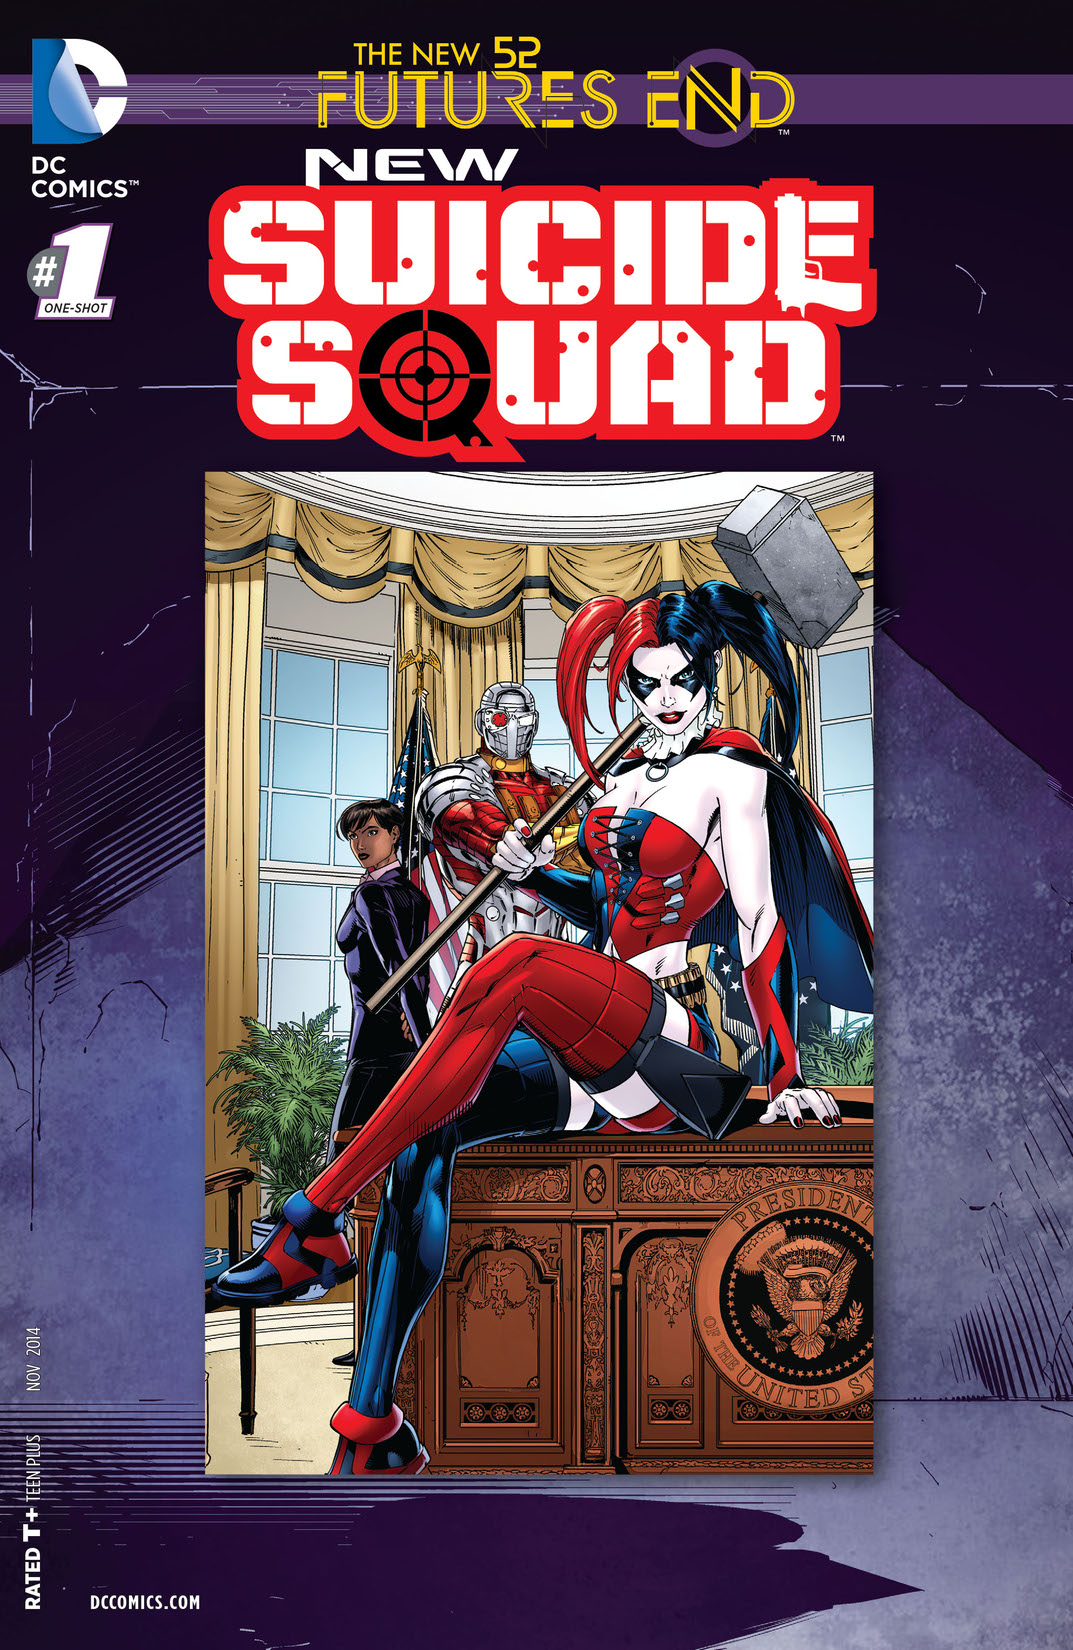 New Suicide Squad: Futures End #1 preview images